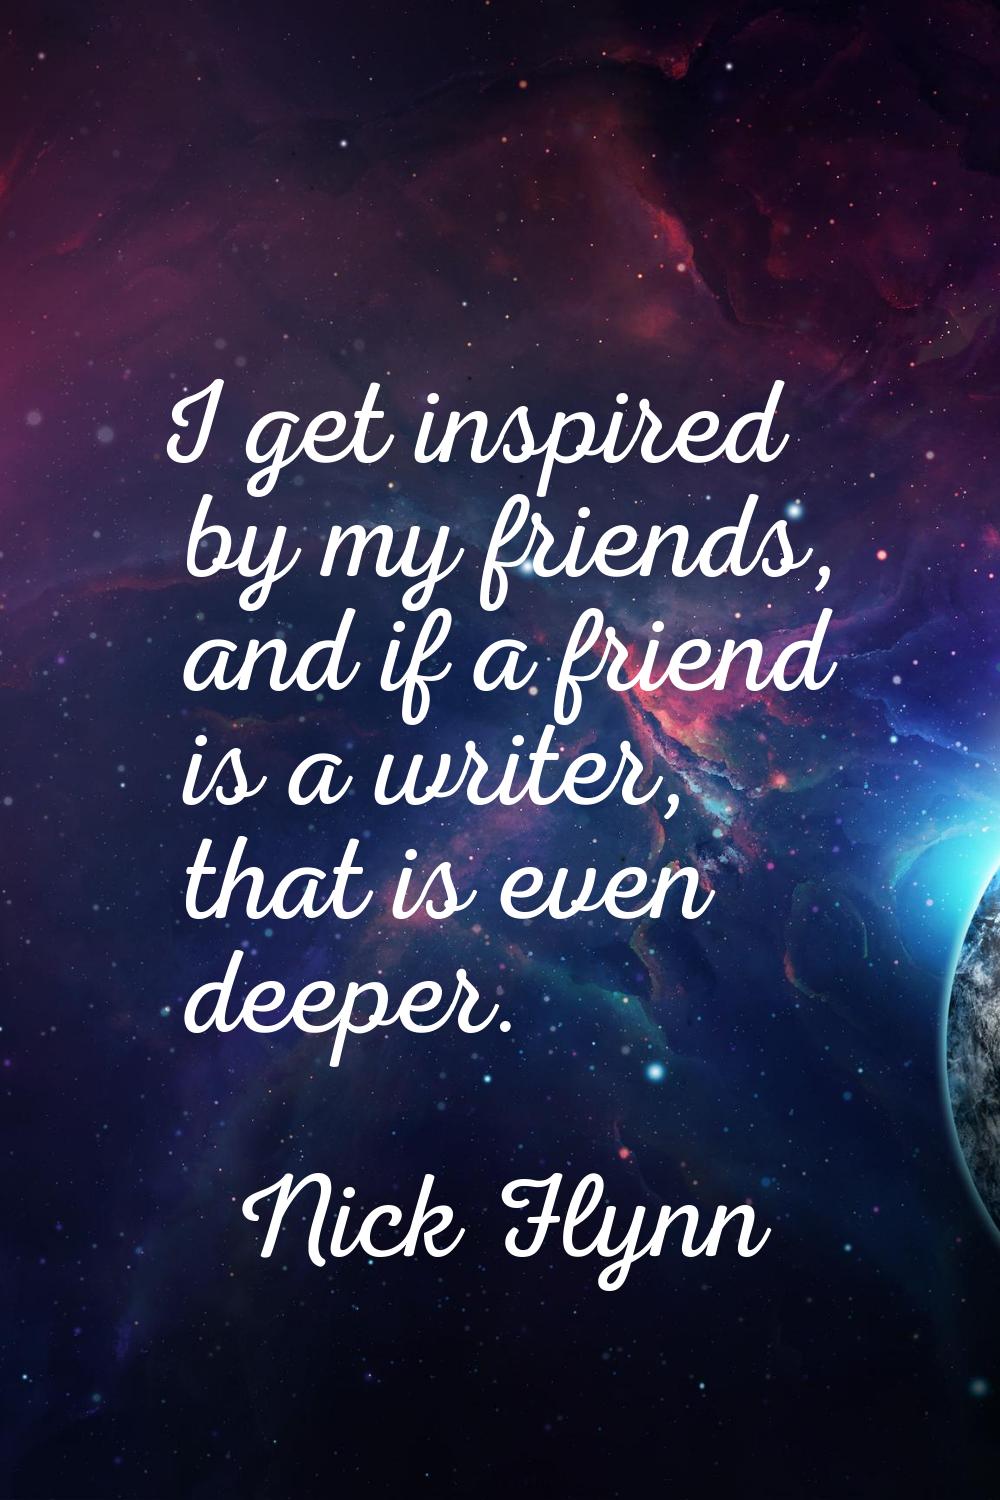 I get inspired by my friends, and if a friend is a writer, that is even deeper.